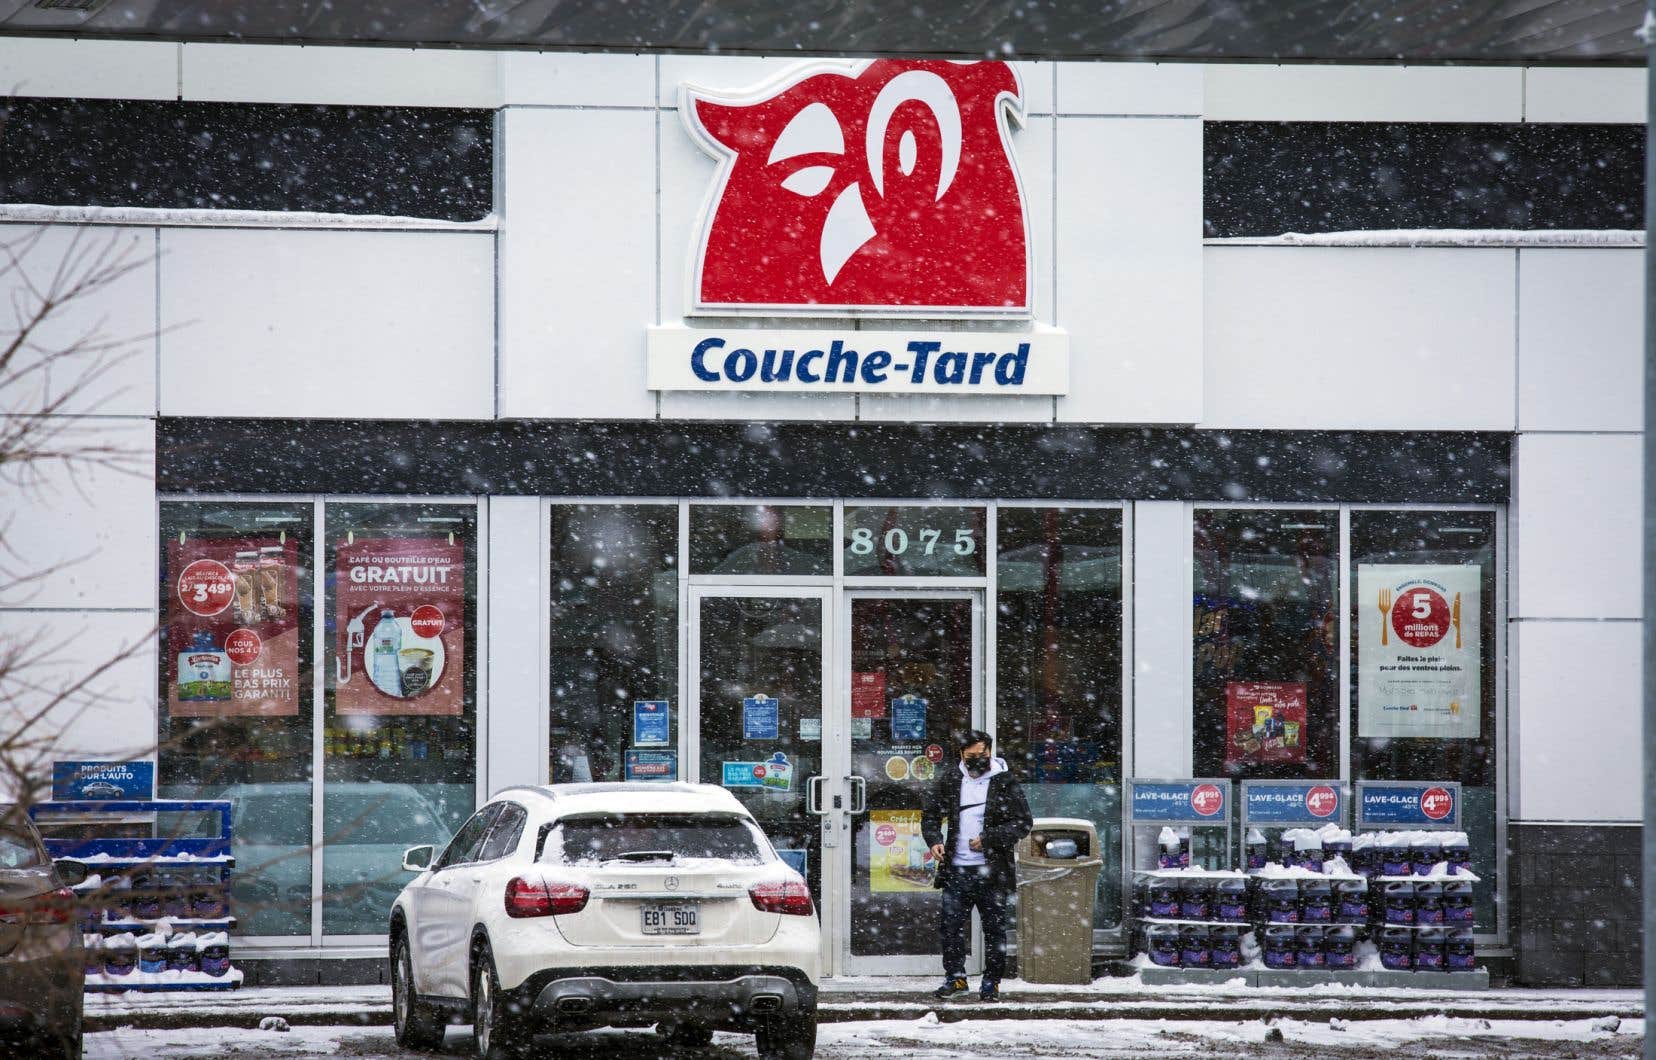 Alimentation Couche-Tard suspends its activities in Russia

